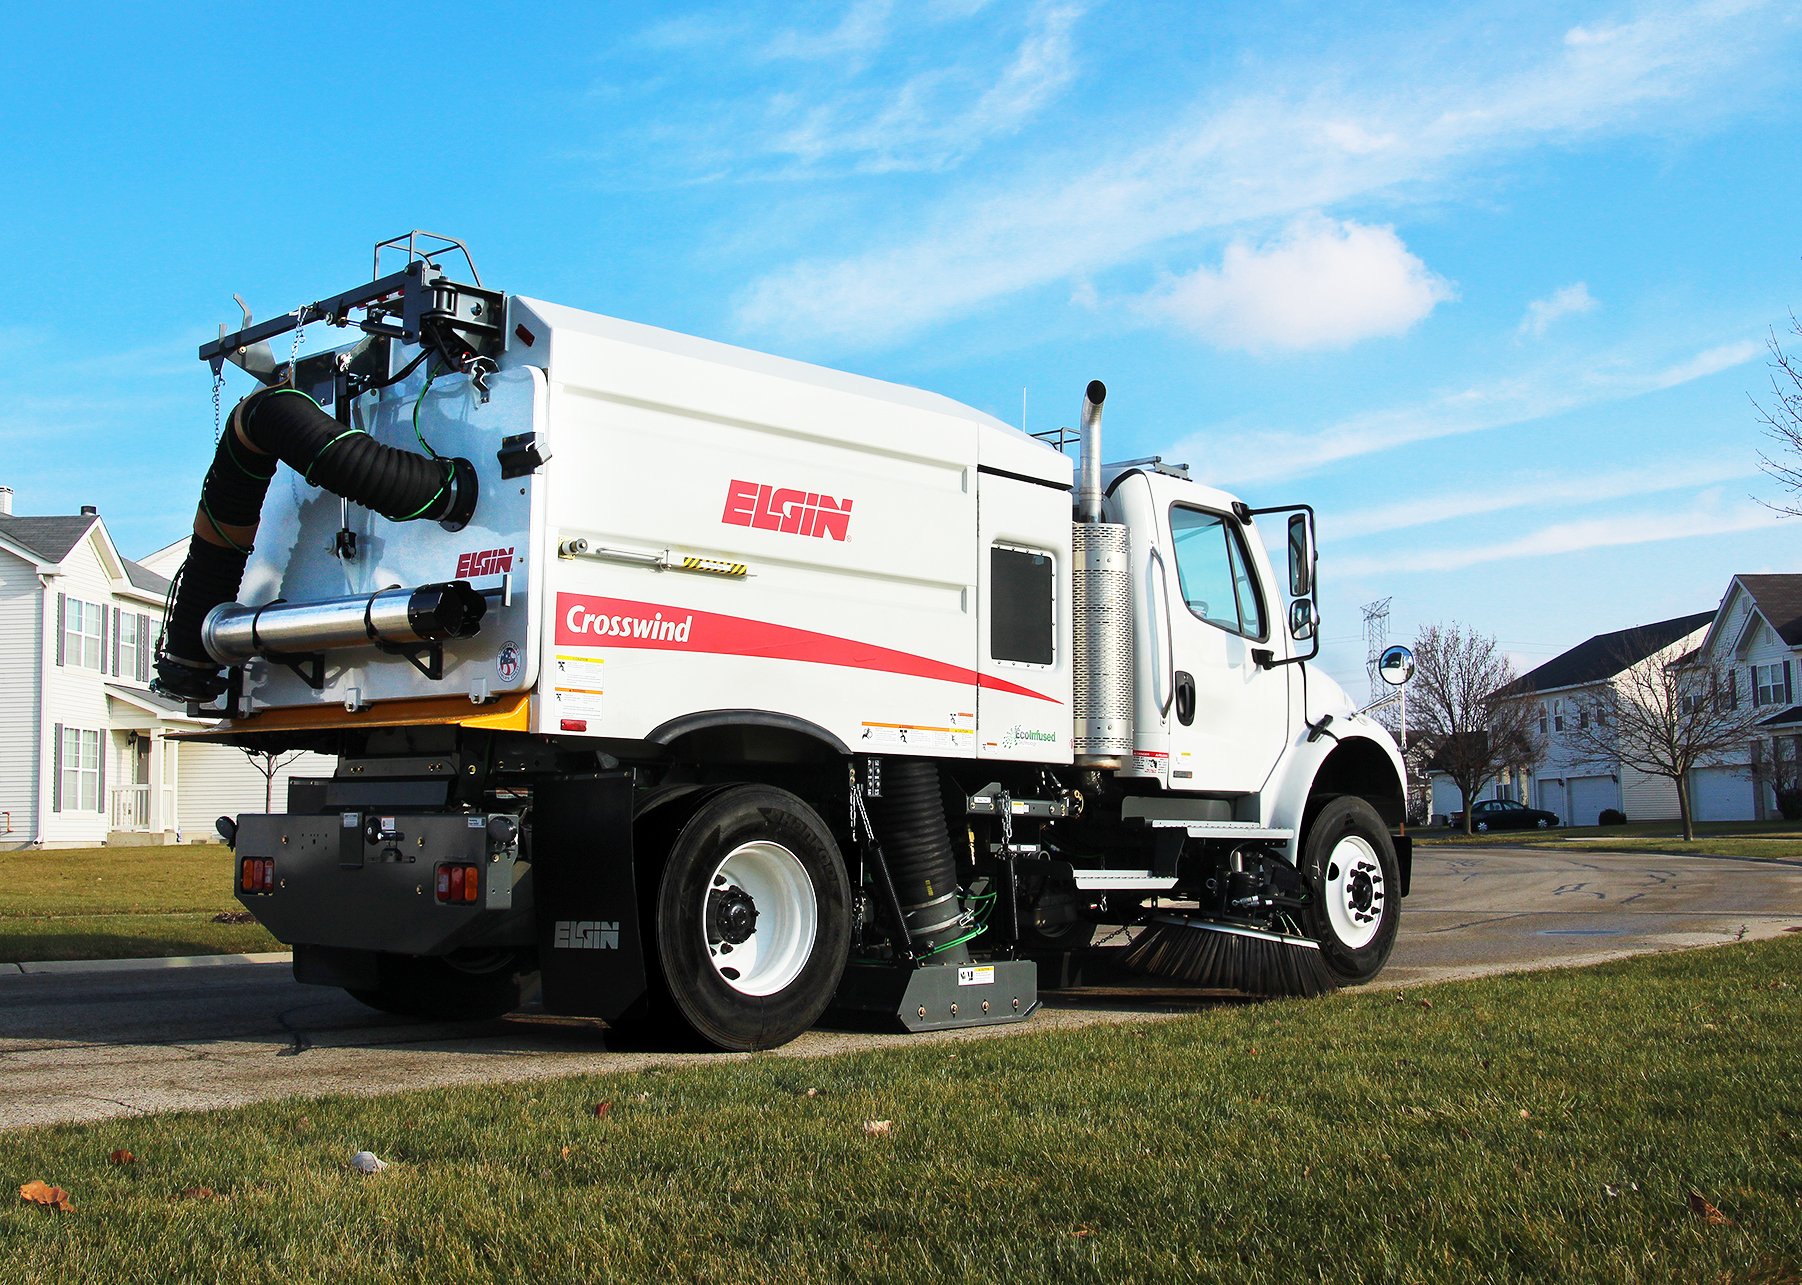 Elgin Sweeper Changes Future of Street Sweeping with New Twist on Single-Engine Technology for Crosswind® Sweeper